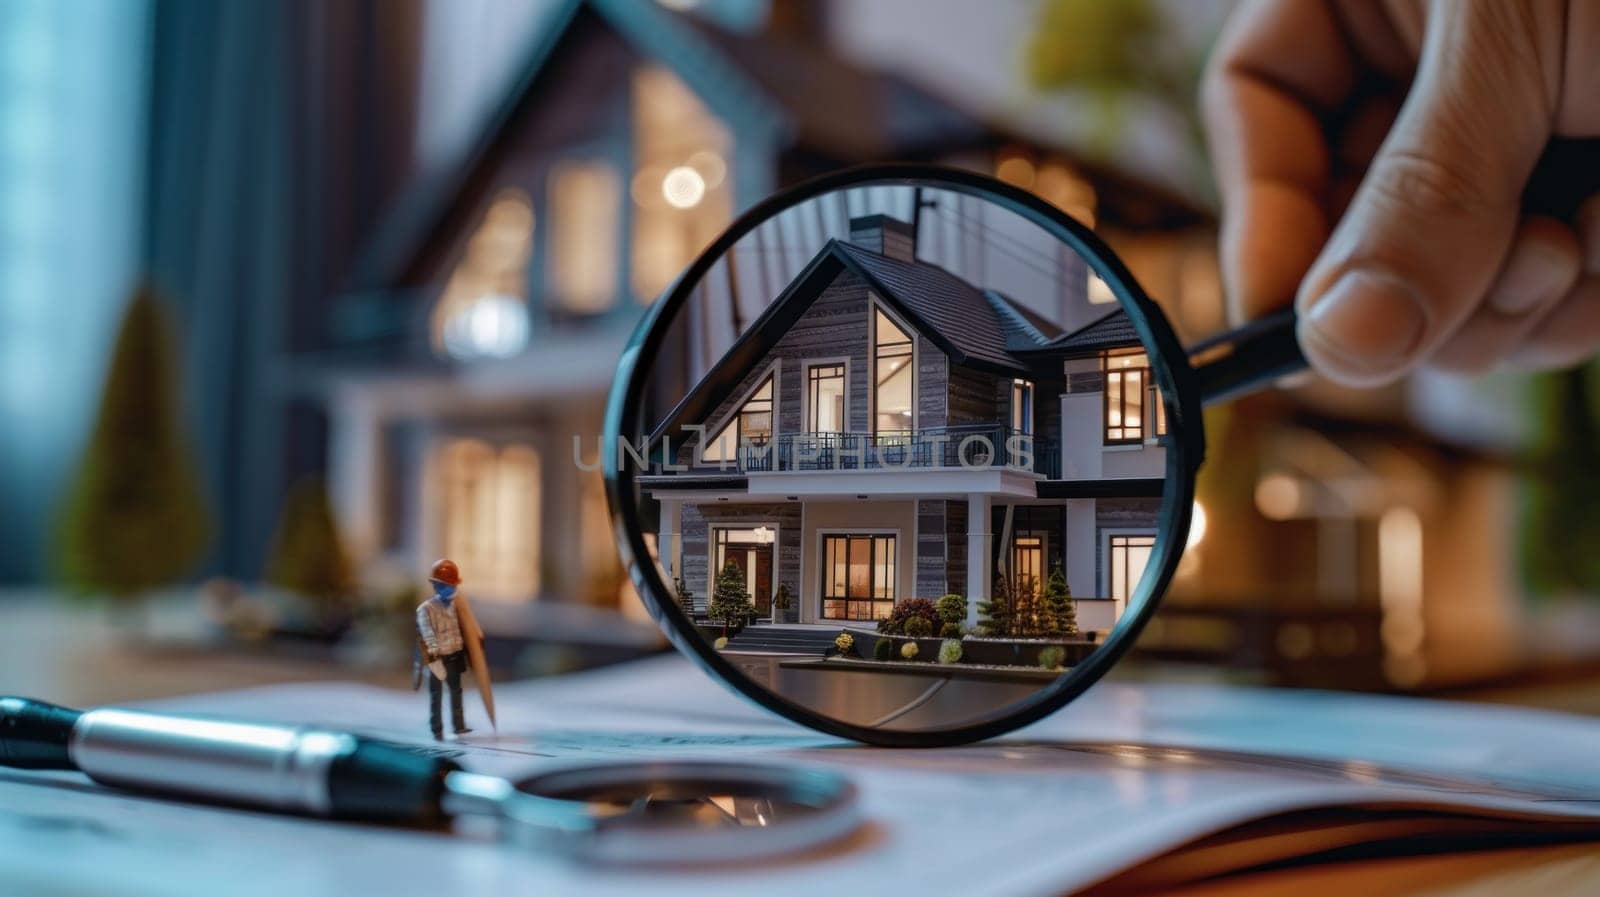 A house is shown with a magnifying glass on top of it.